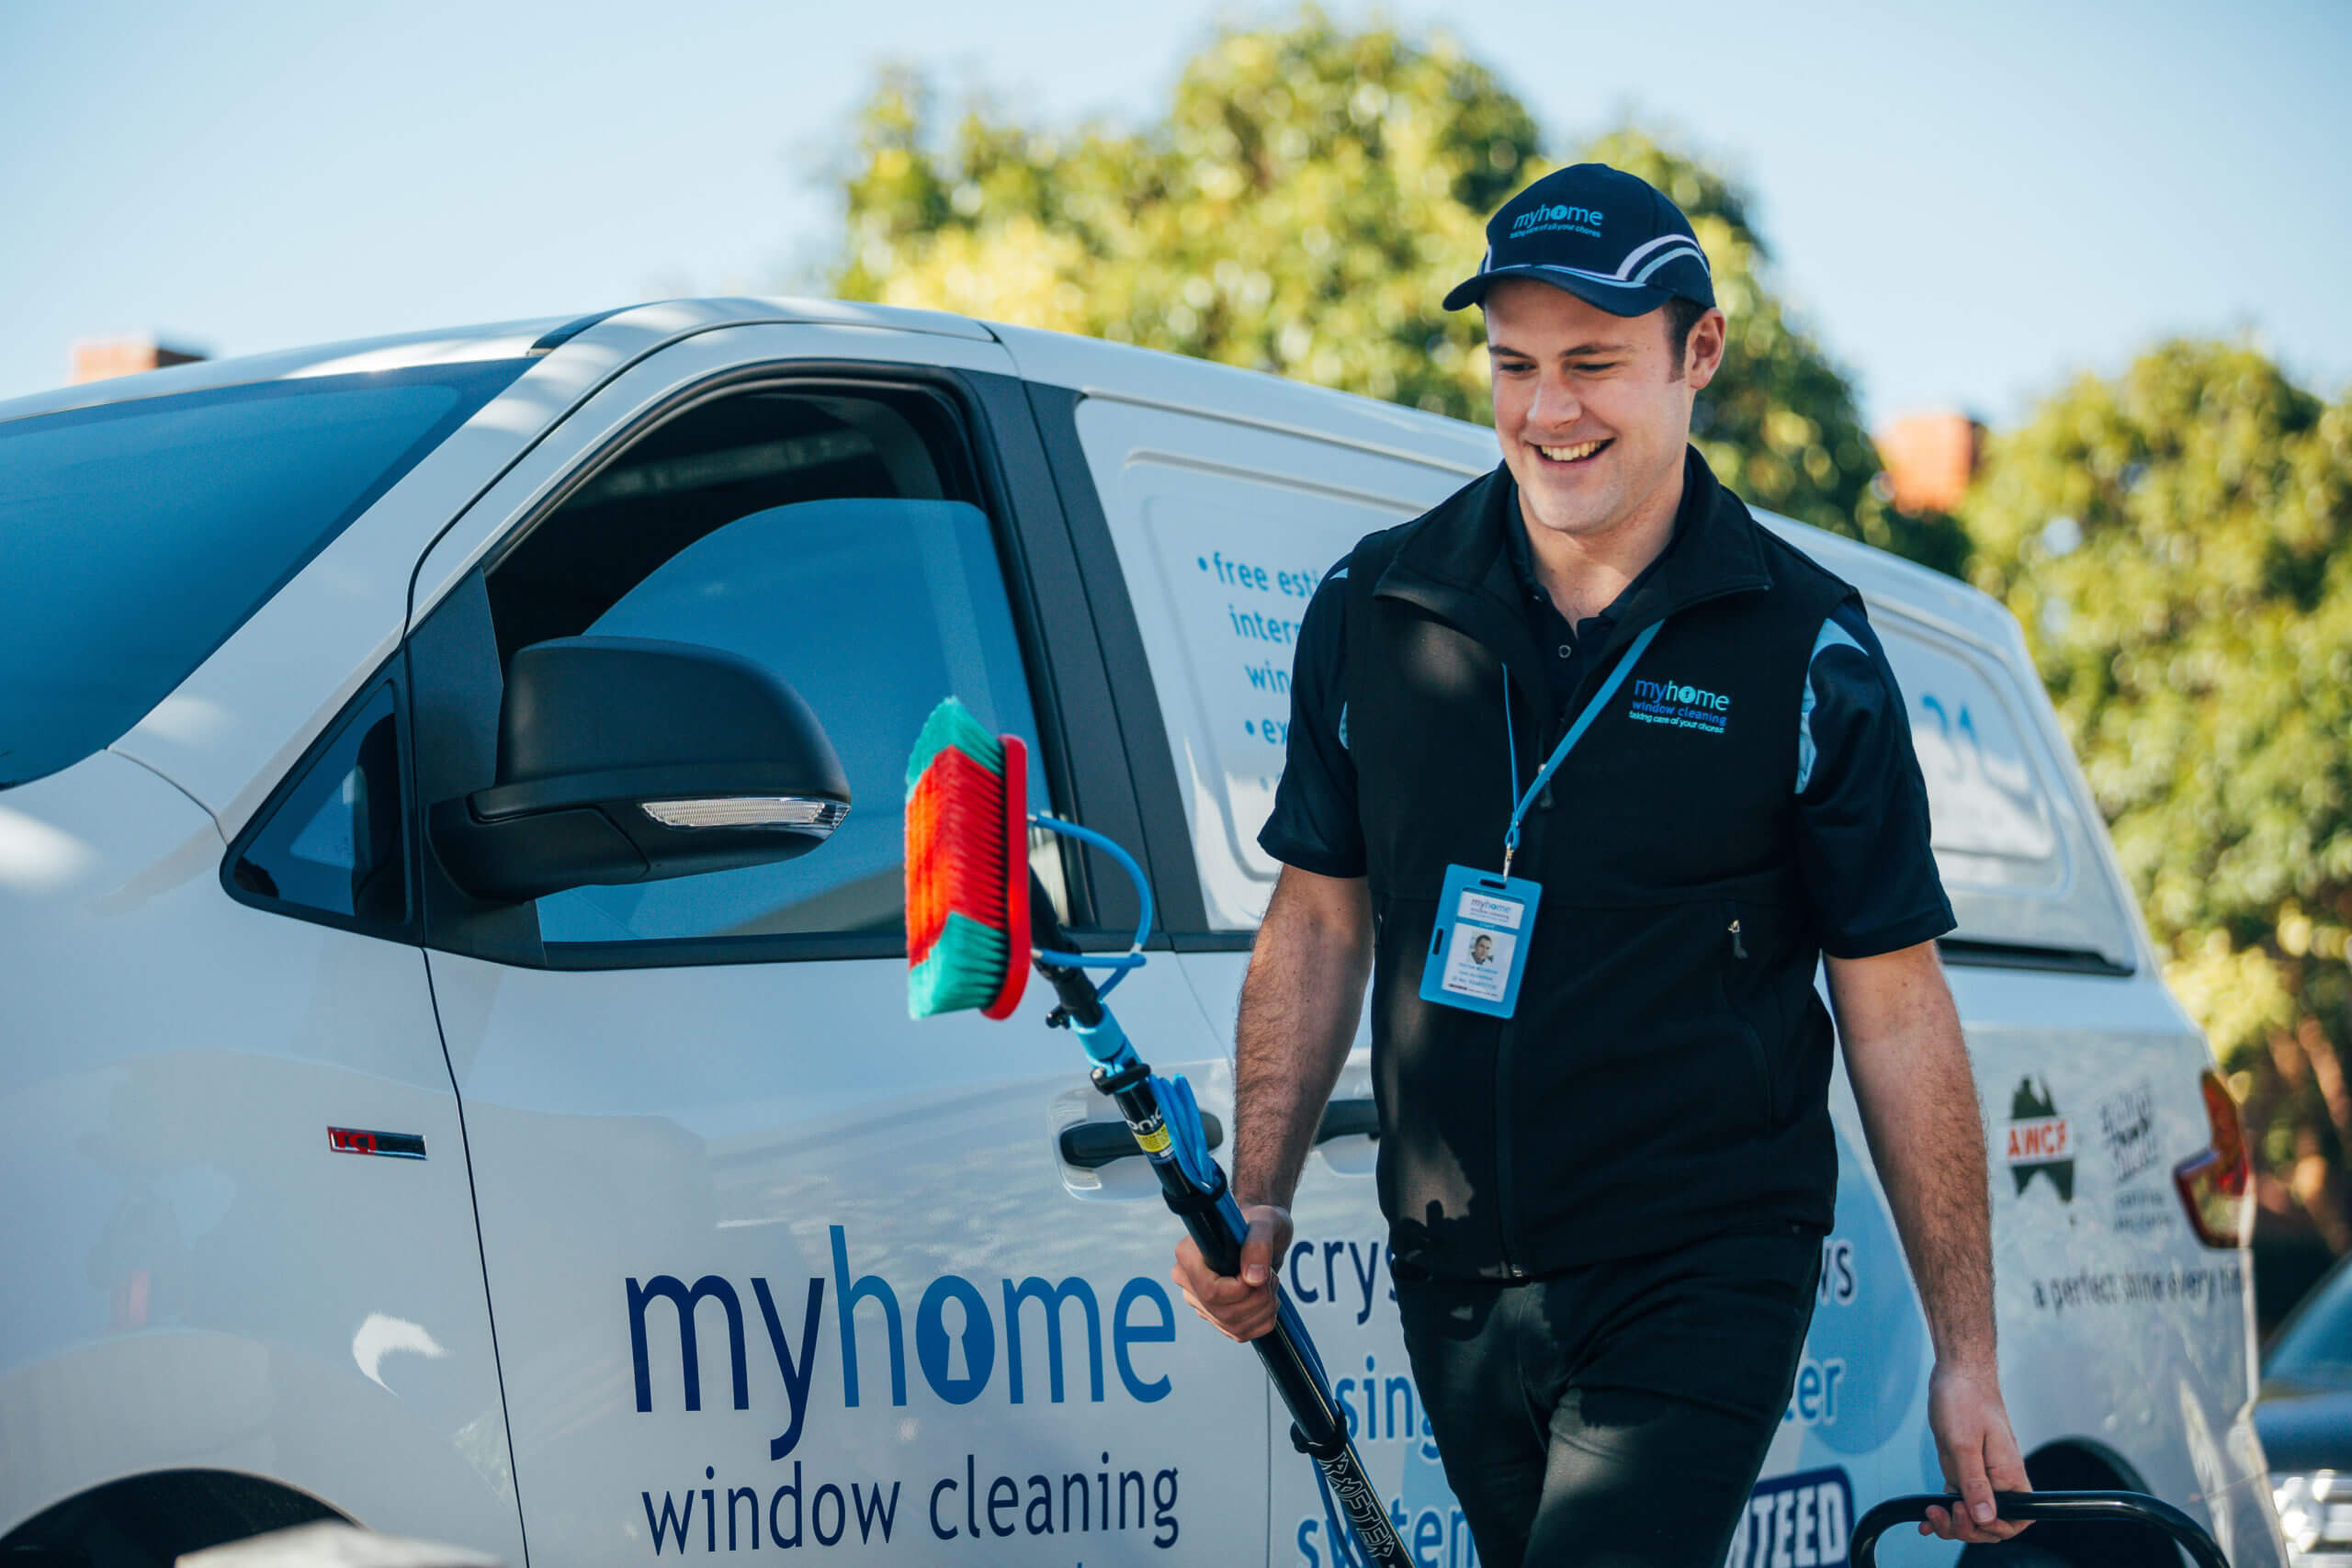 A MyHome window cleaner walking away from his van with UltraPure window cleaning equipment